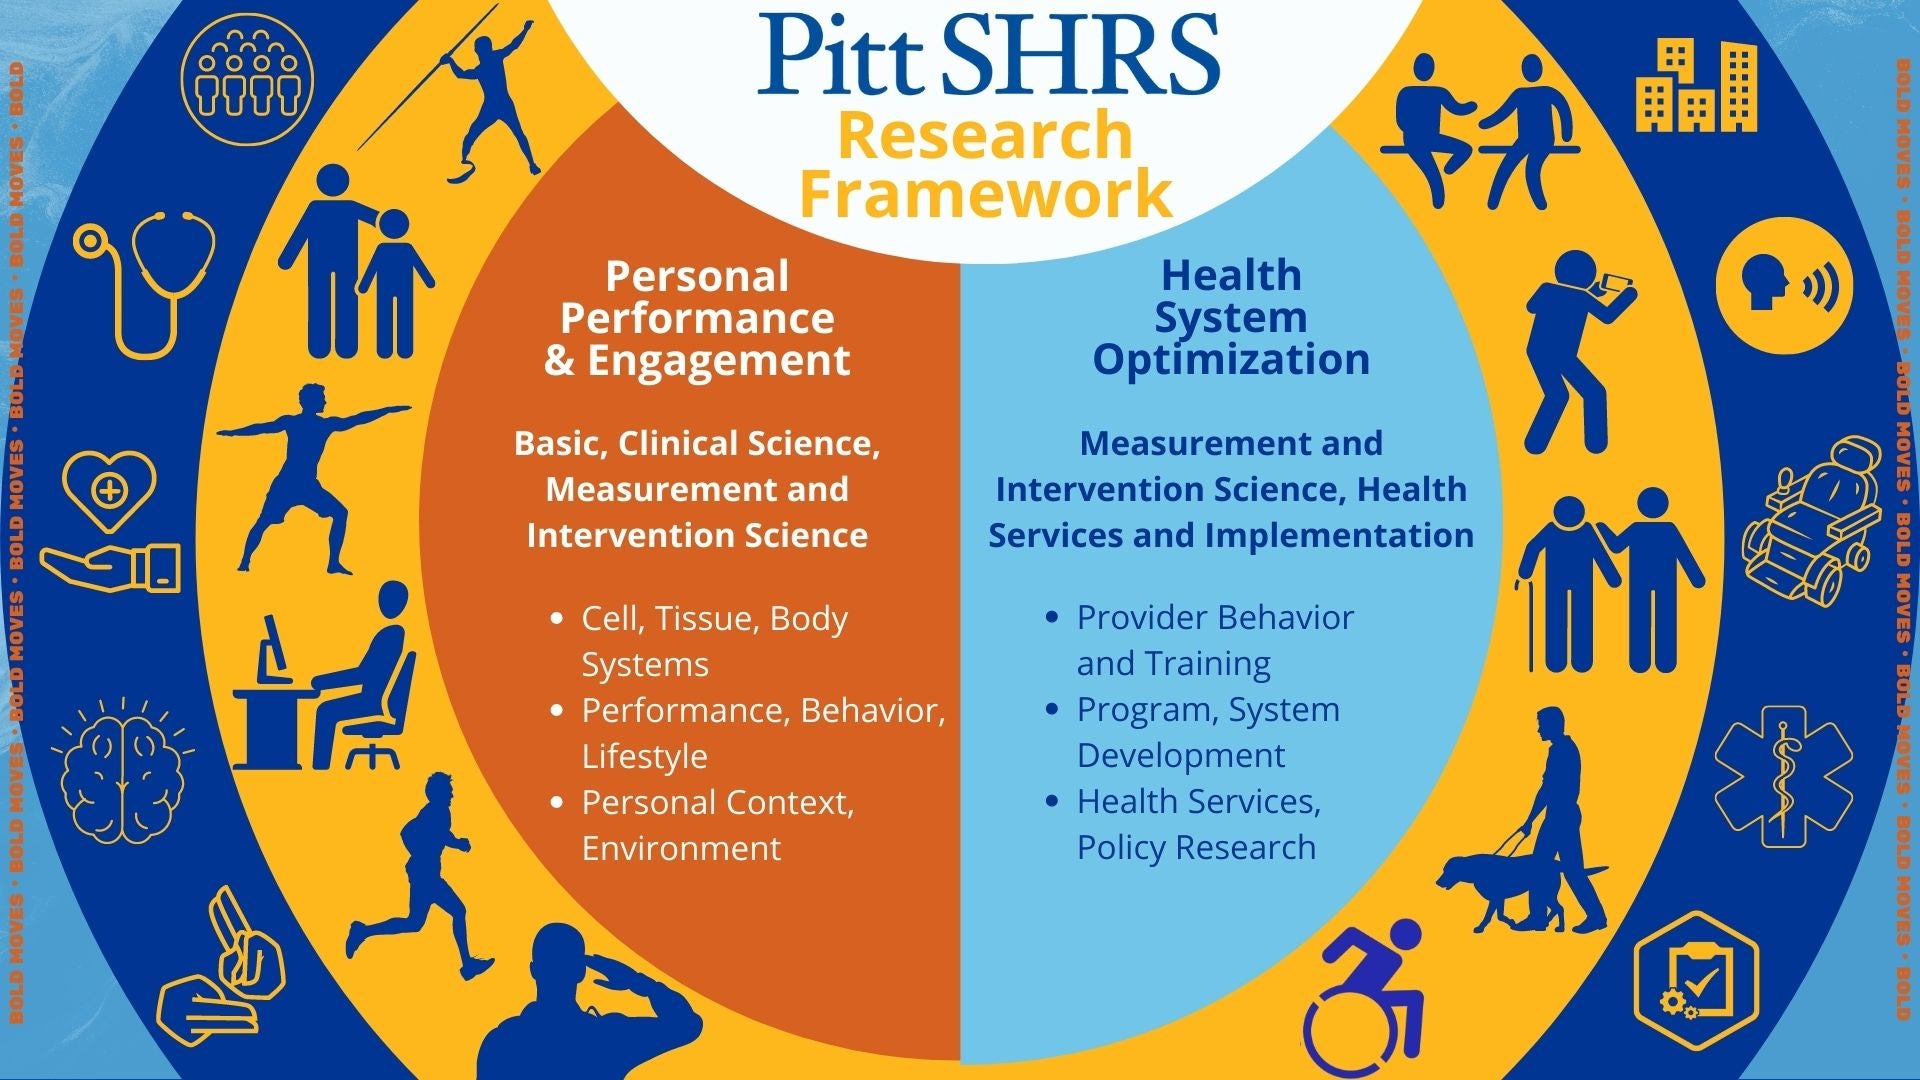 Research Framework Graphic